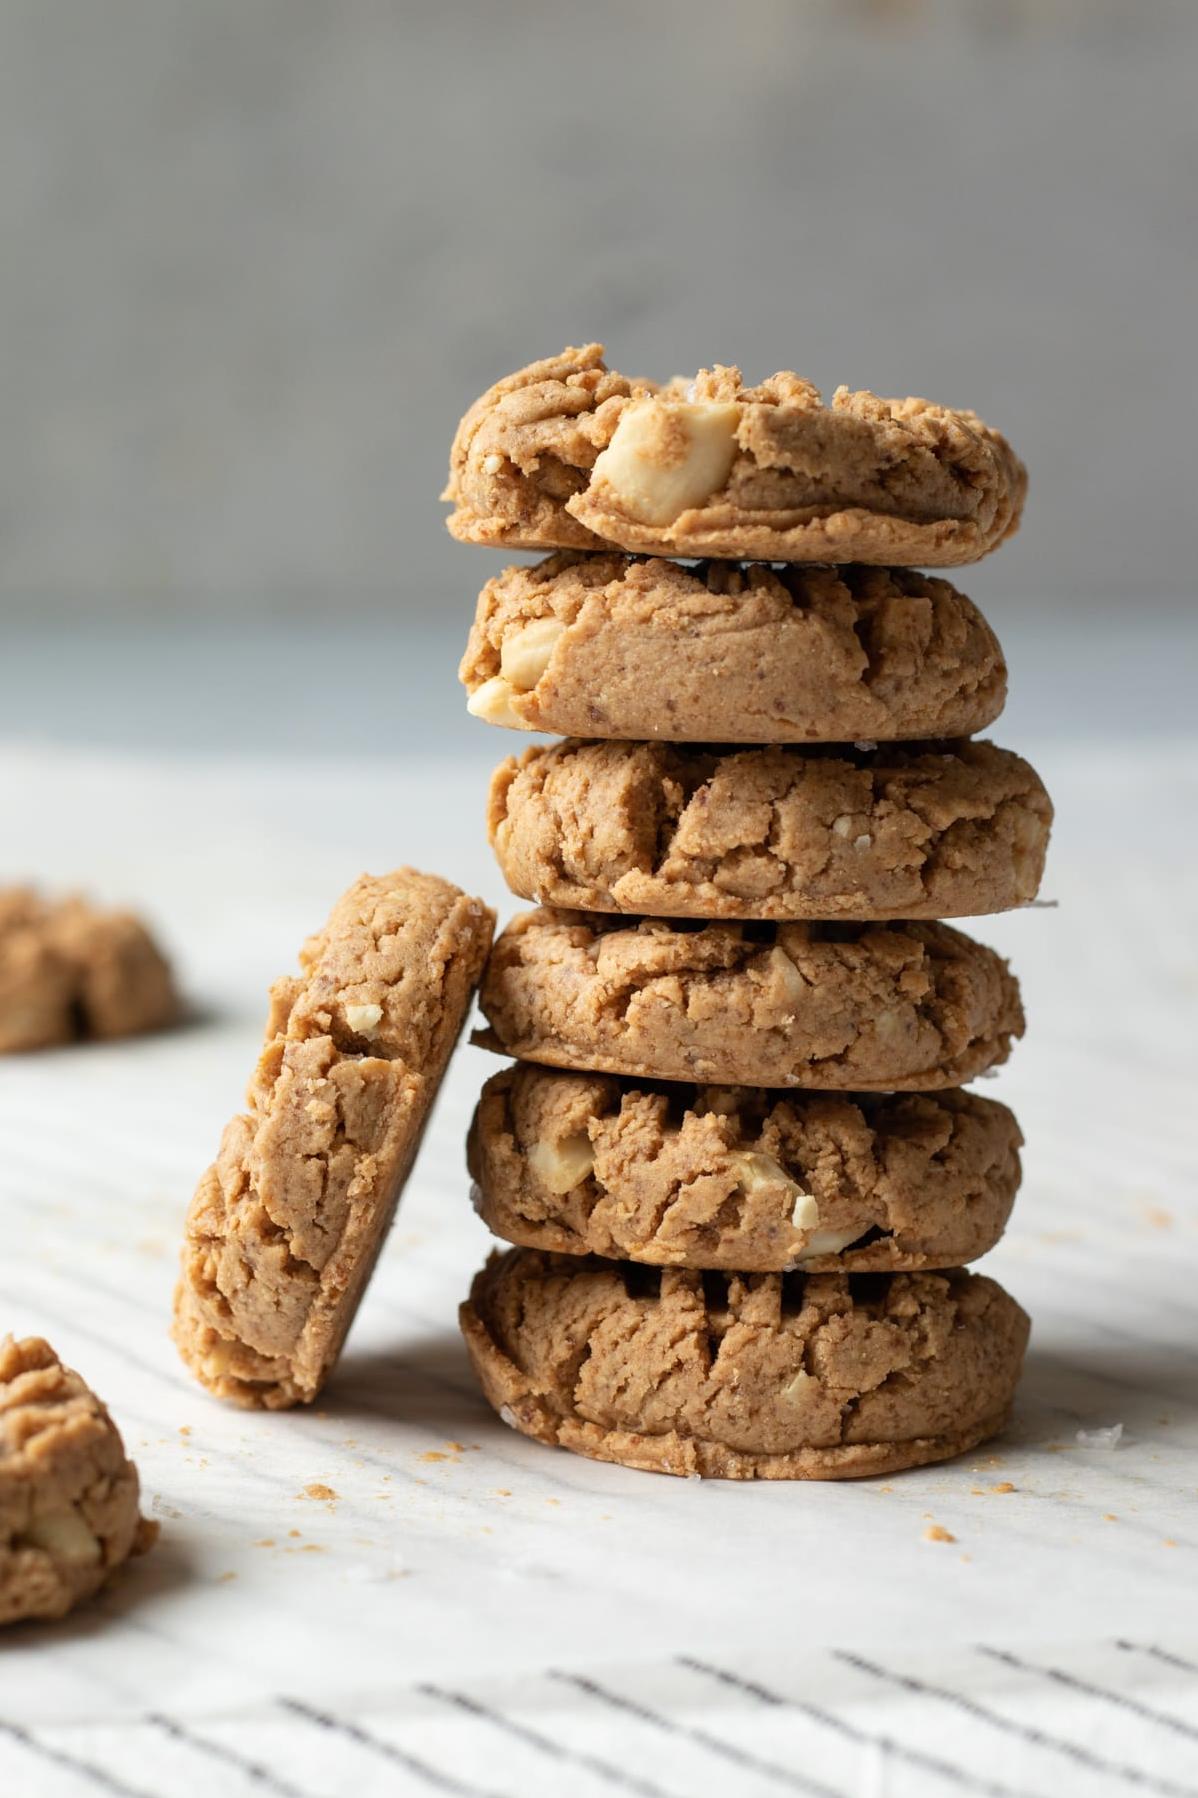  These cookies are perfect for gluten intolerant, dairy intolerant people or anyone in search of healthier snack options.